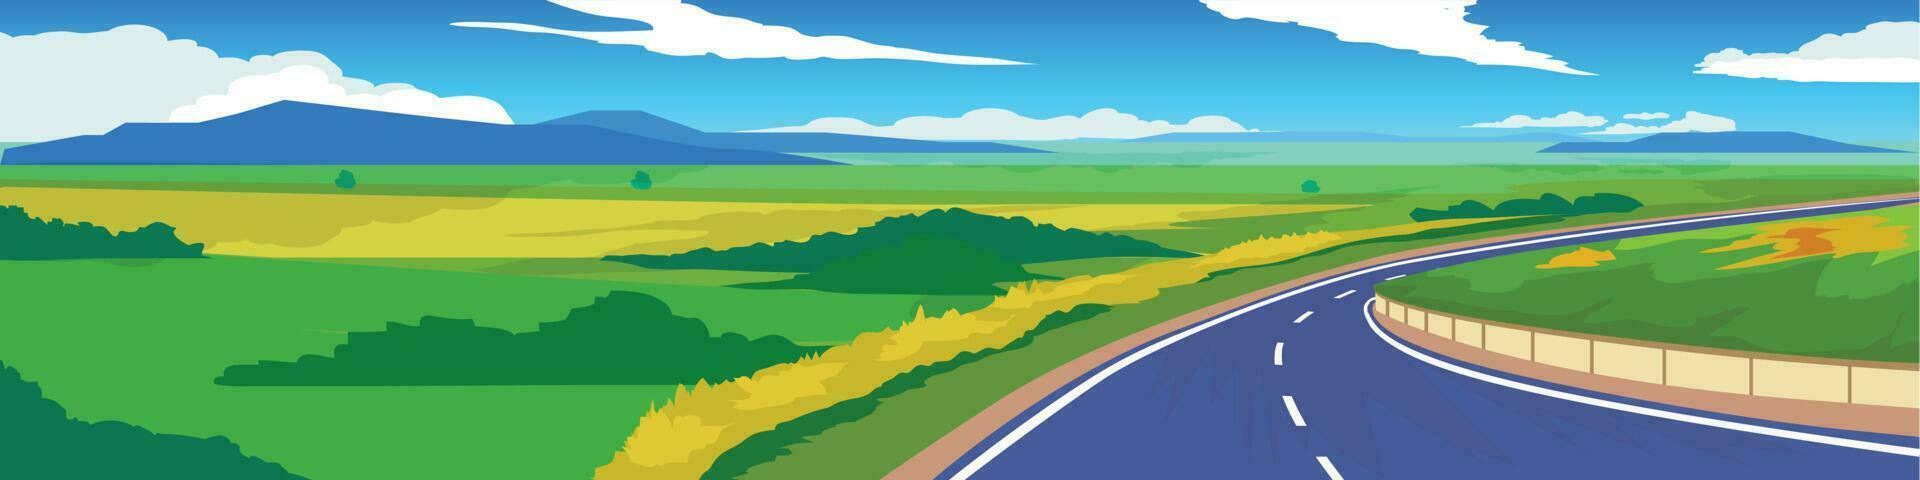 Copy Space Flat Vector Illustration. of curved asphalt road path and environment of wide open fields of green. Two side flowers. Green plains and low mountains.  Under blue sky and white clouds.